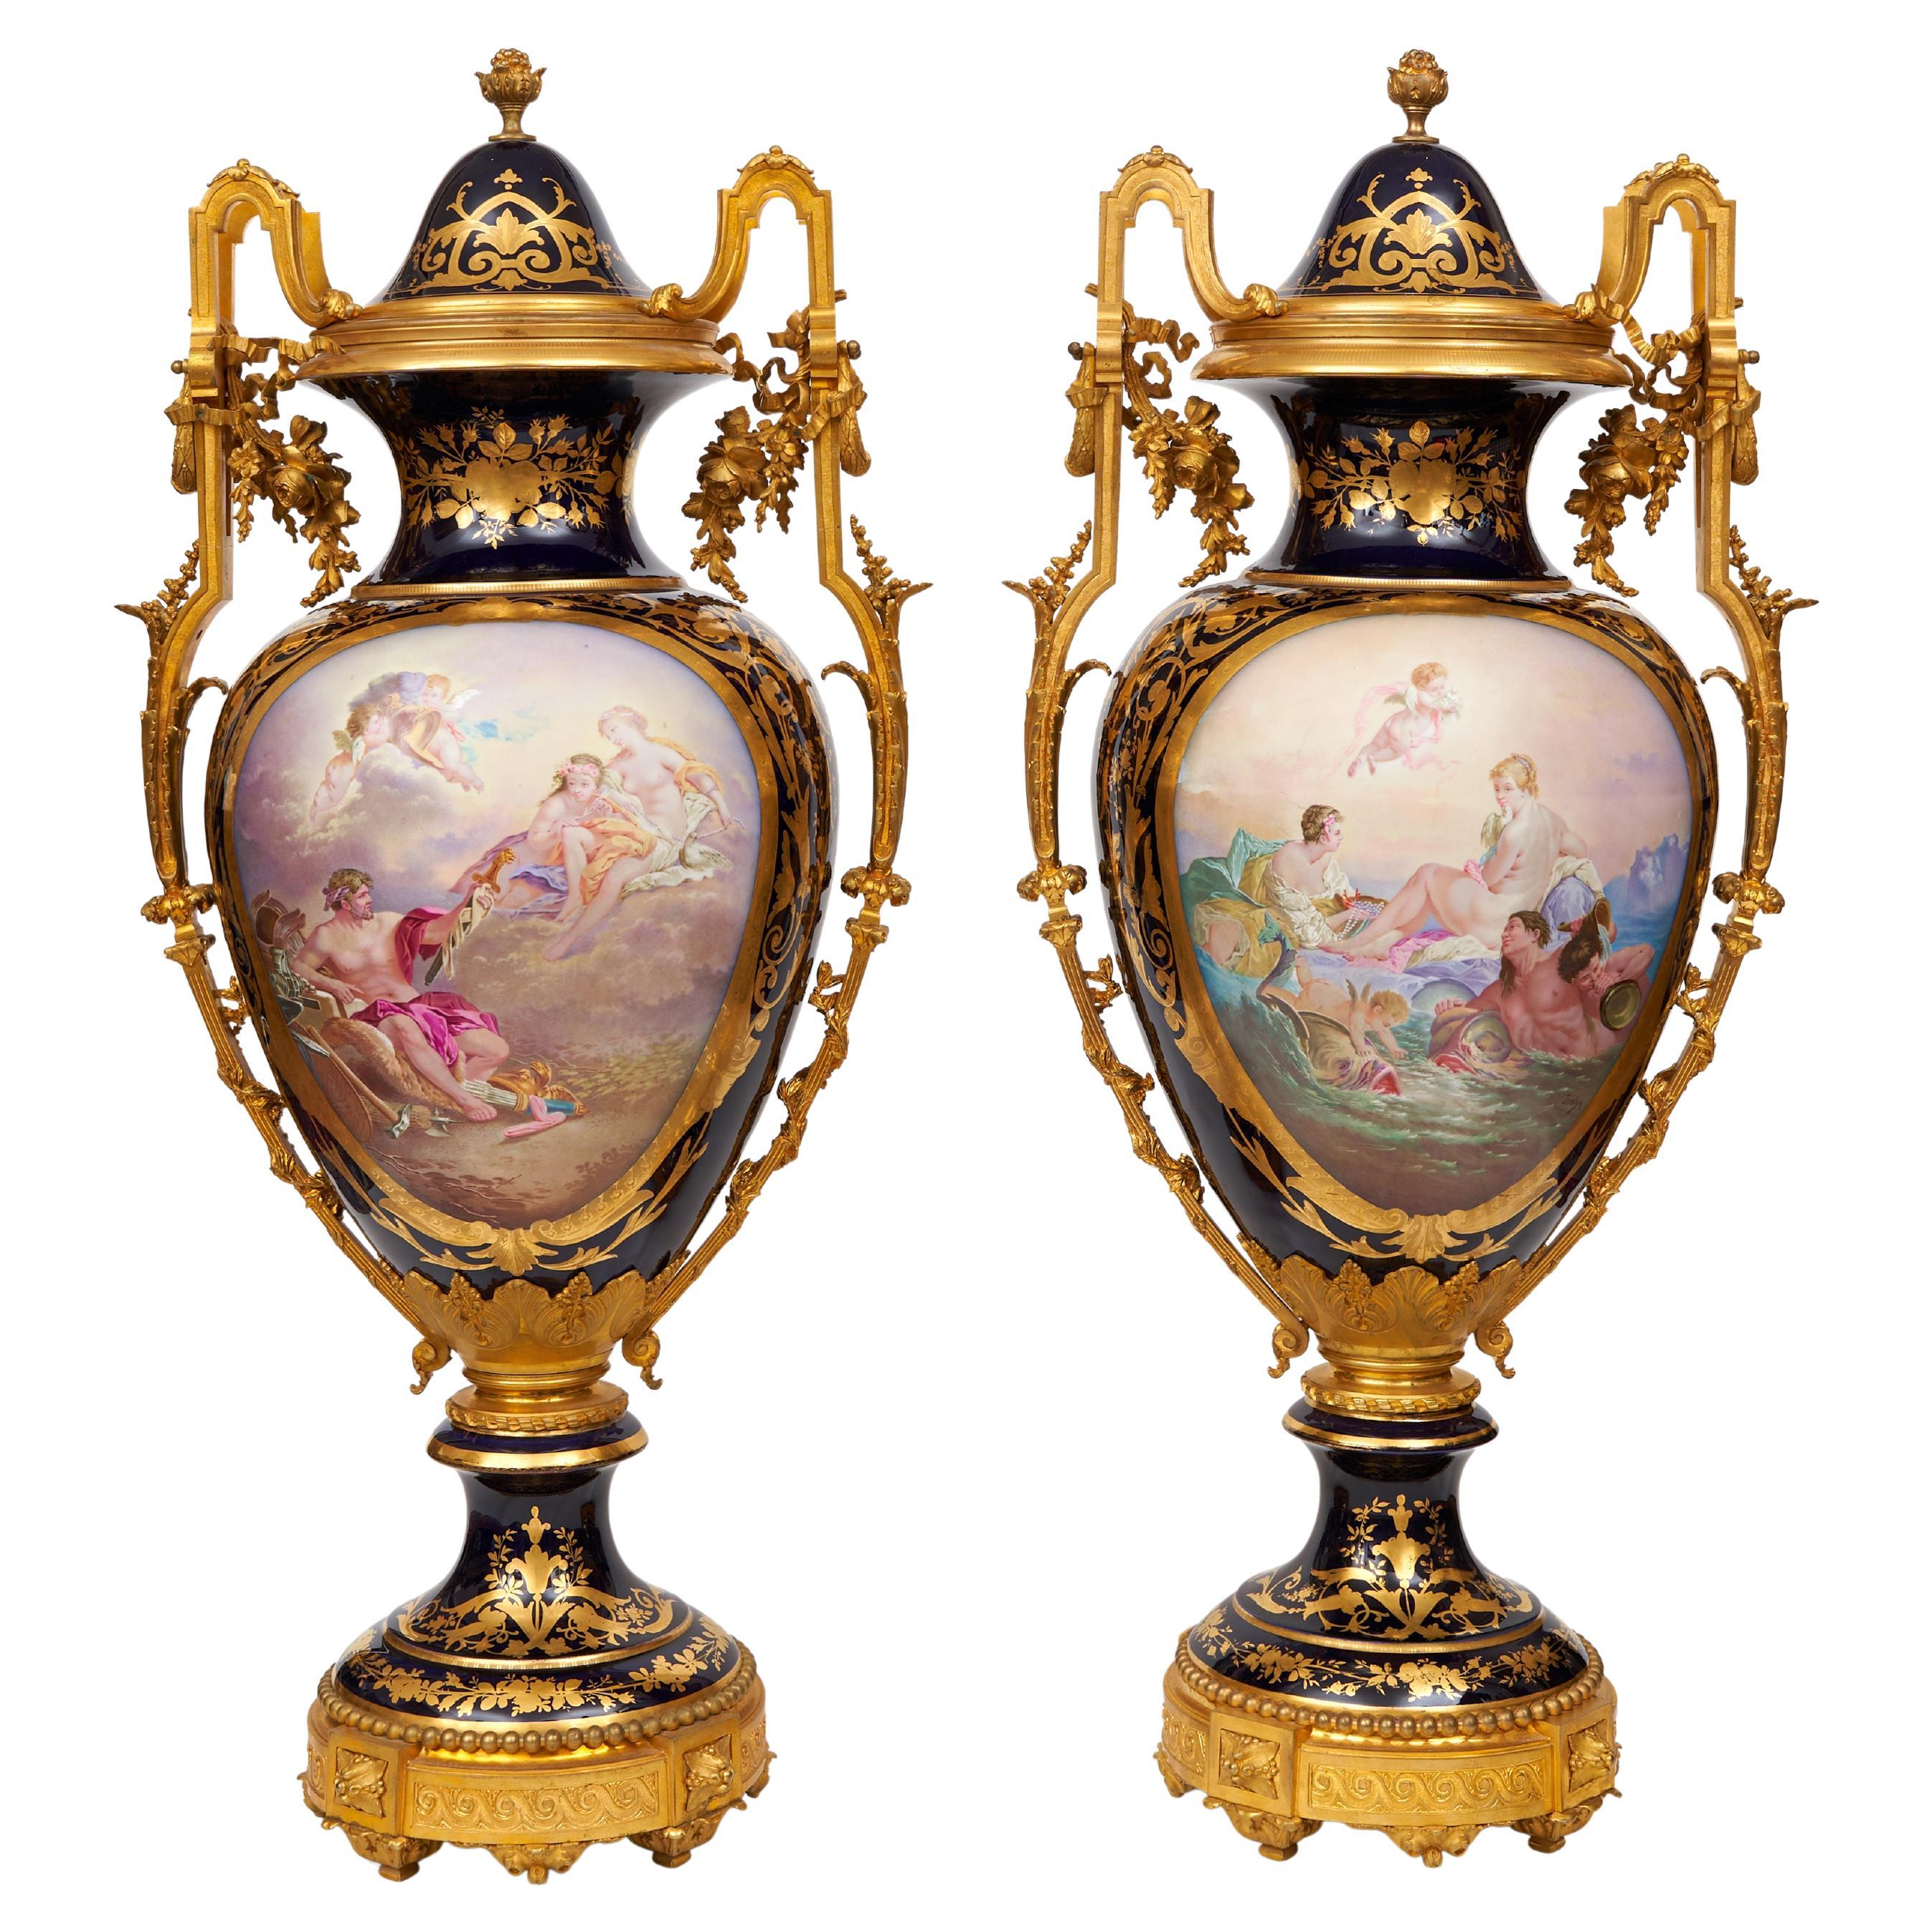 A Monumental Pair Of Late 19th/Early 20th Century Sevres Style Porcelain And Orm For Sale